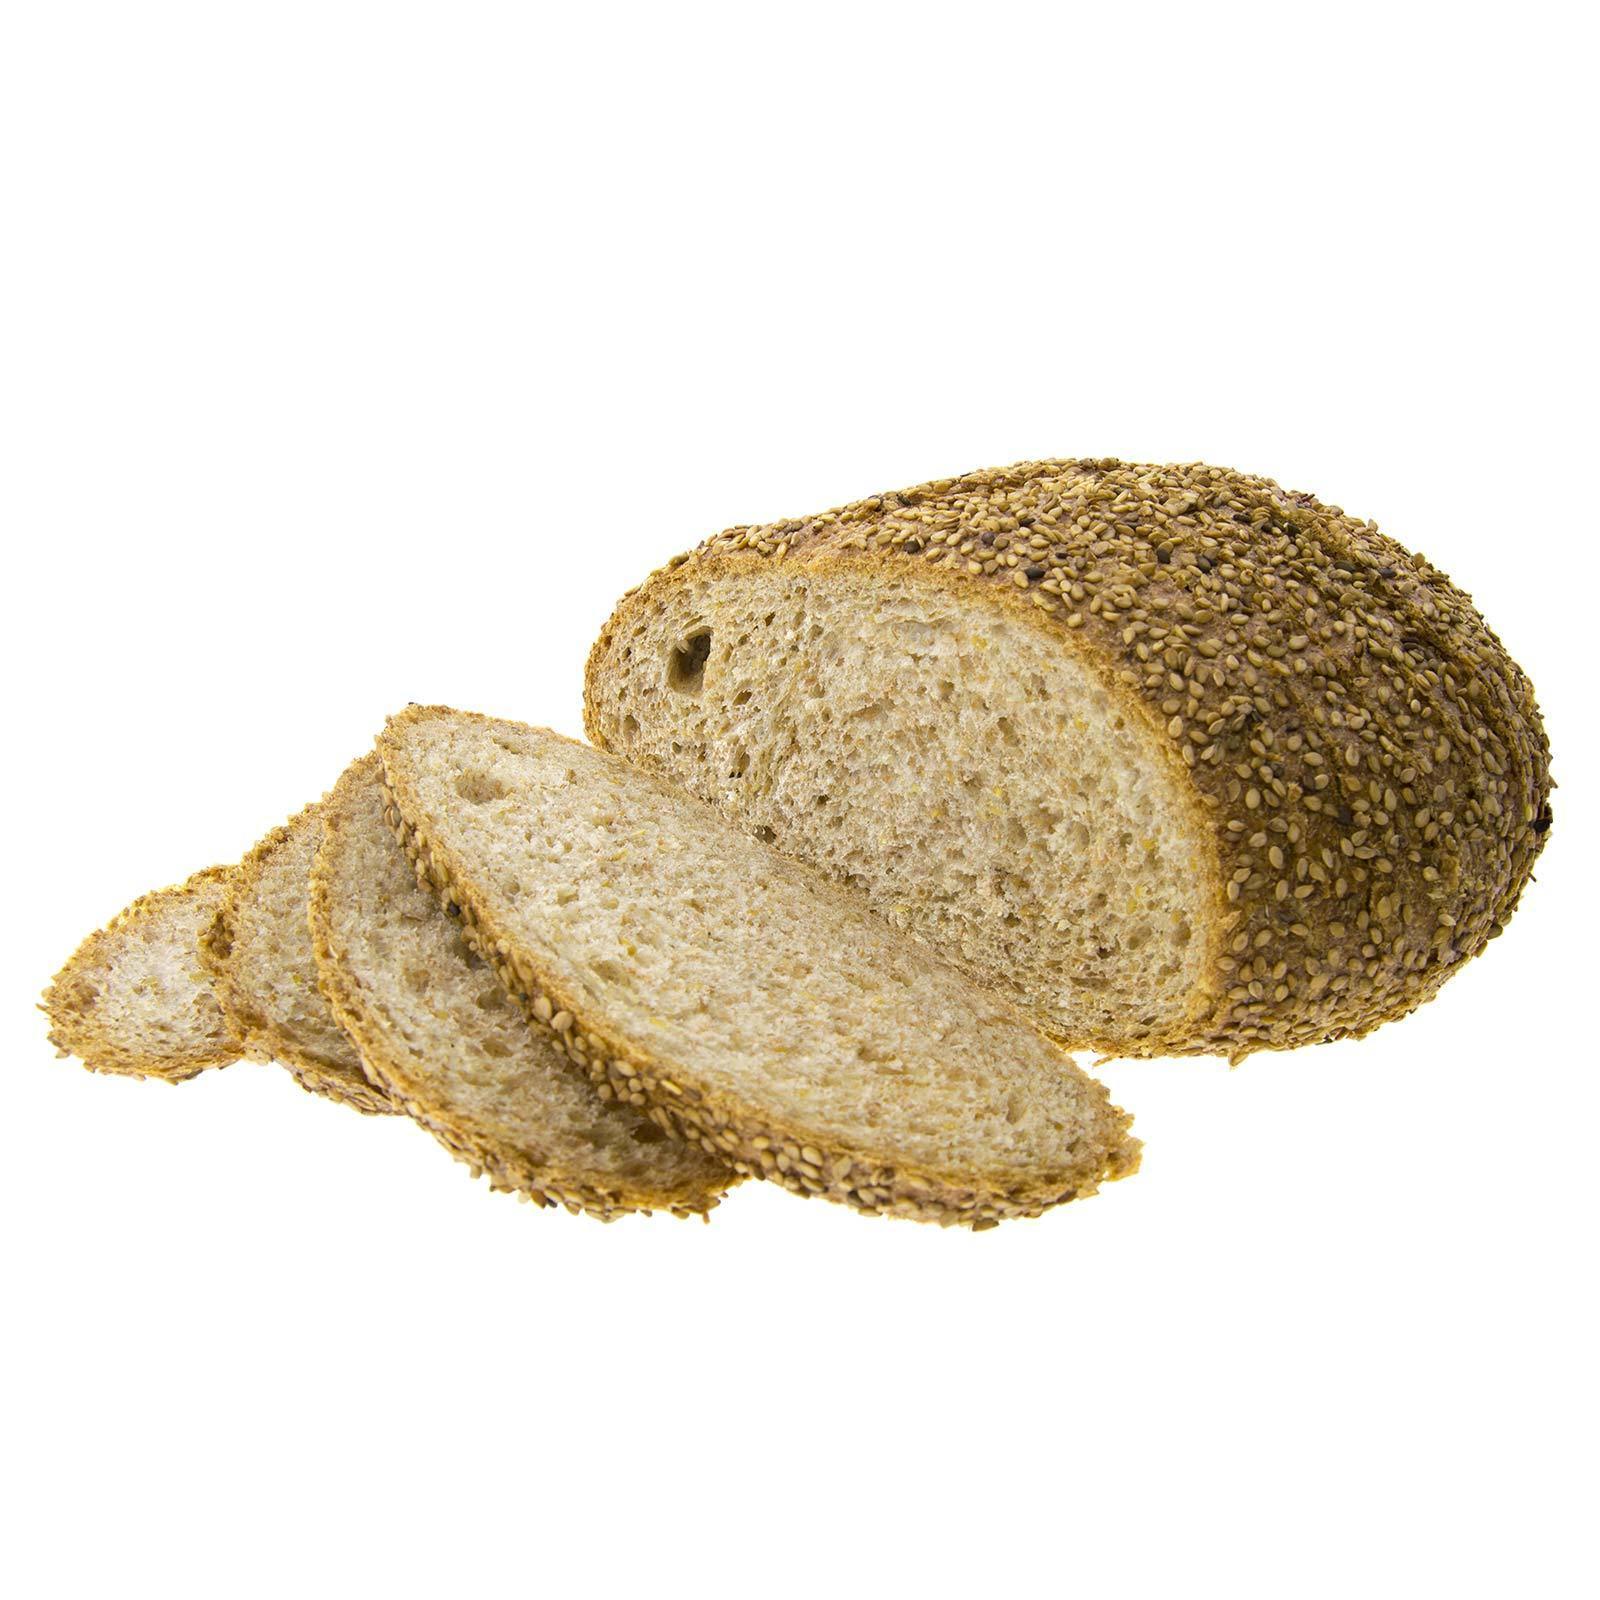 Round bread of whole wheat with sesame 450g ecological (uncut)